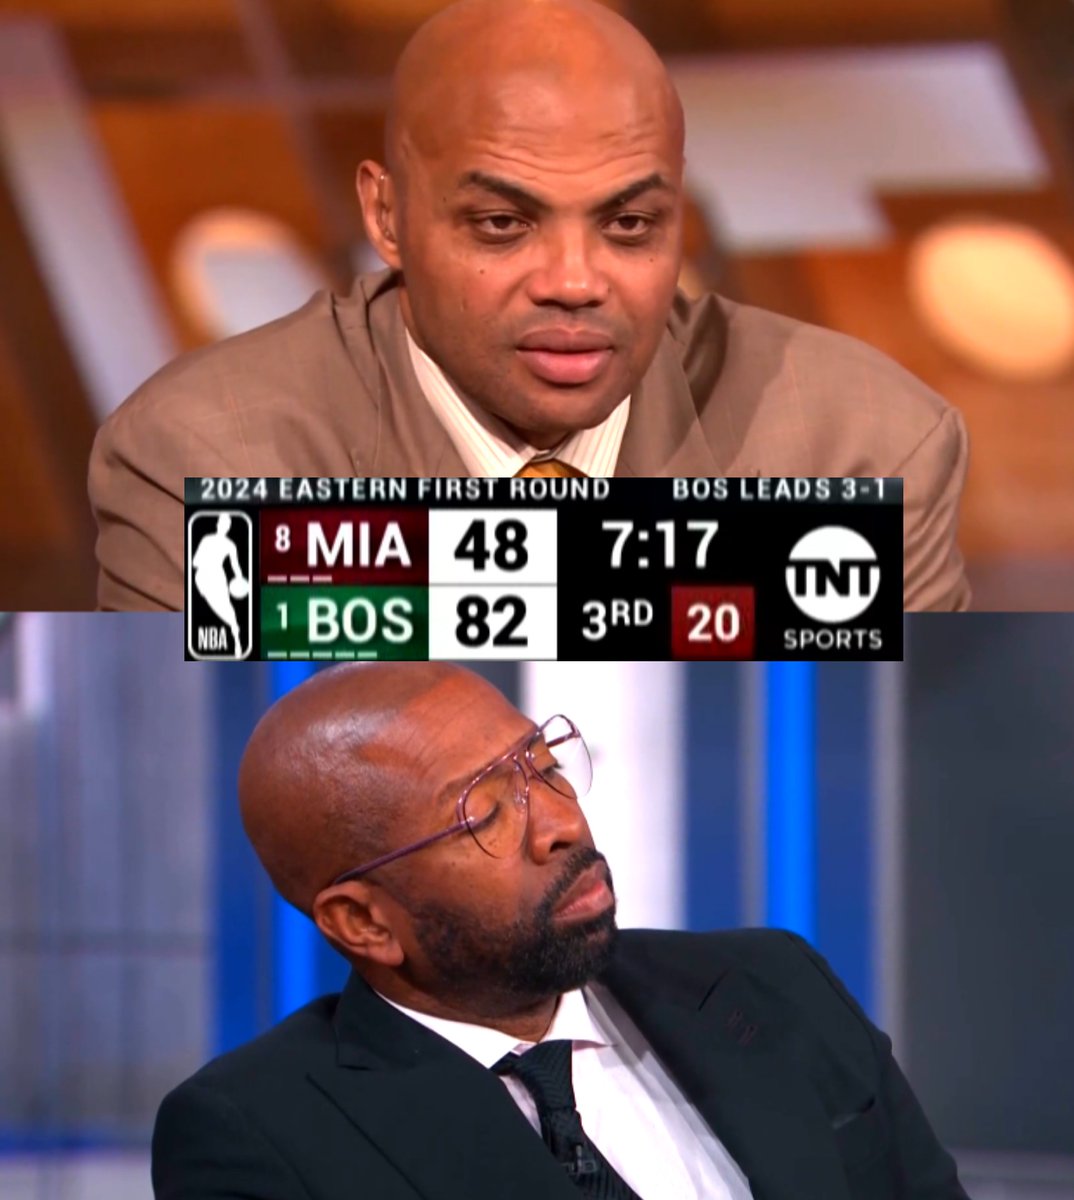 Heat-Celtics Game 5 has been a total snoozefest 😴